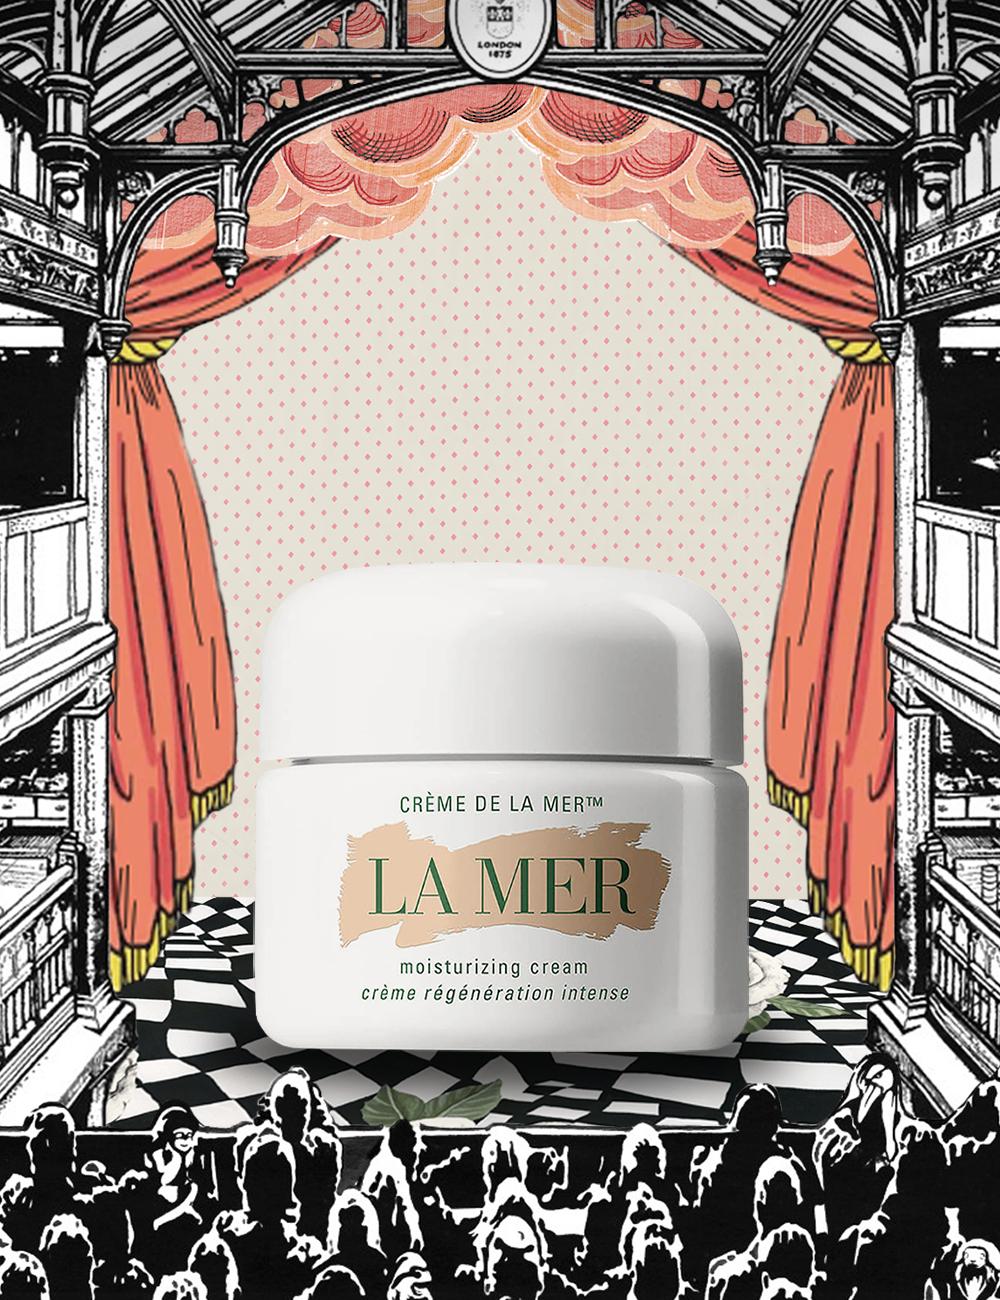 Is La Mer Worth It? Expert Reviews of the Luxury Face Cream